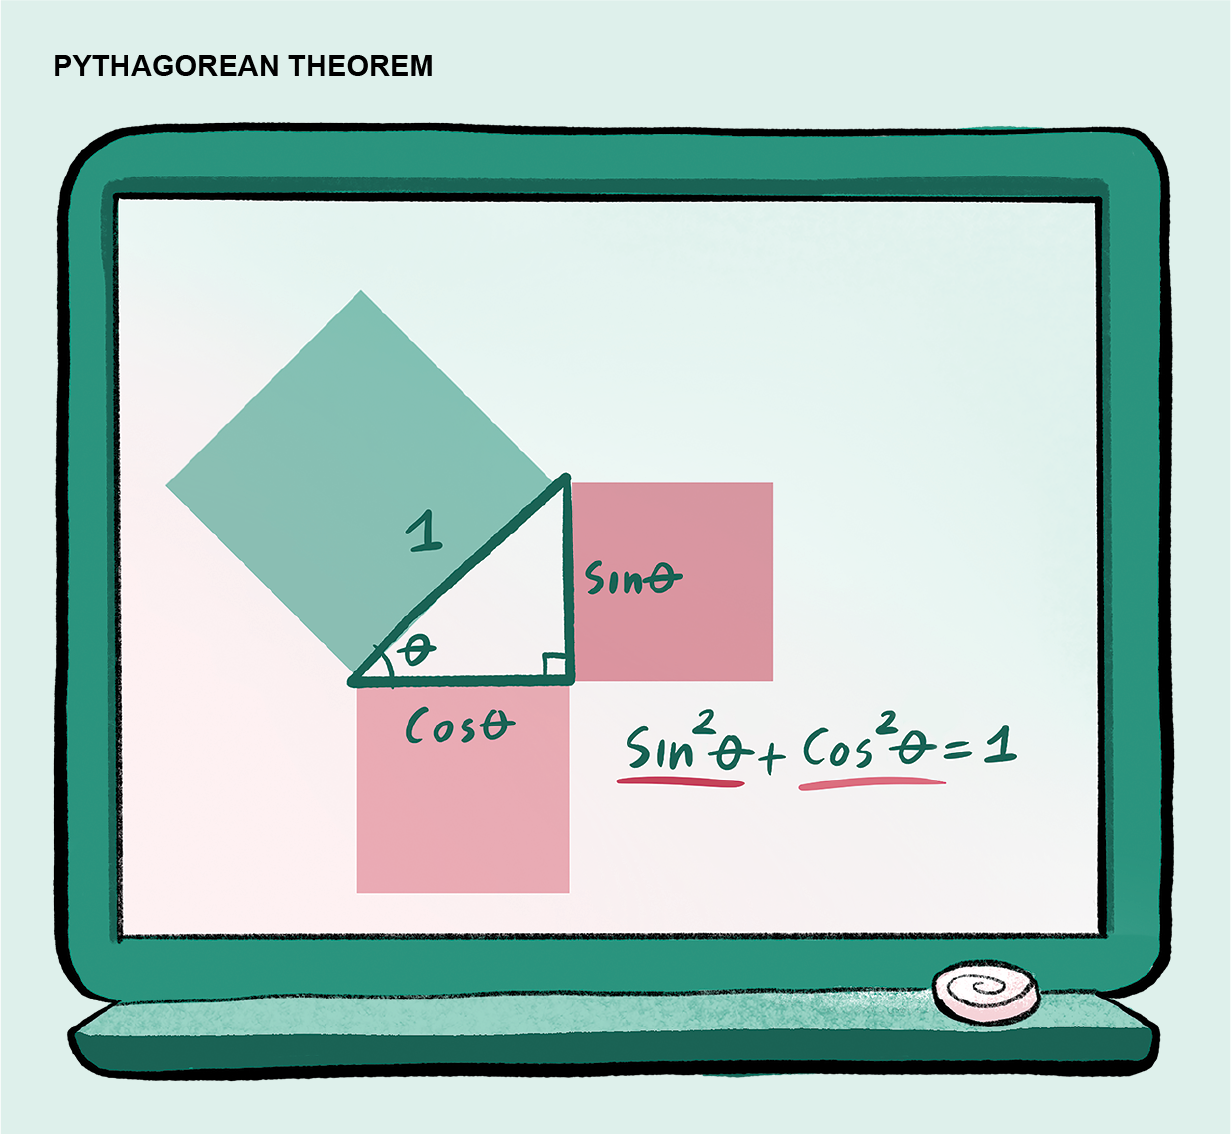 Graphic shows the Pythagorean theorem applied to a right triangle with a hypotenuse 1 and an acute angle of theta degrees.